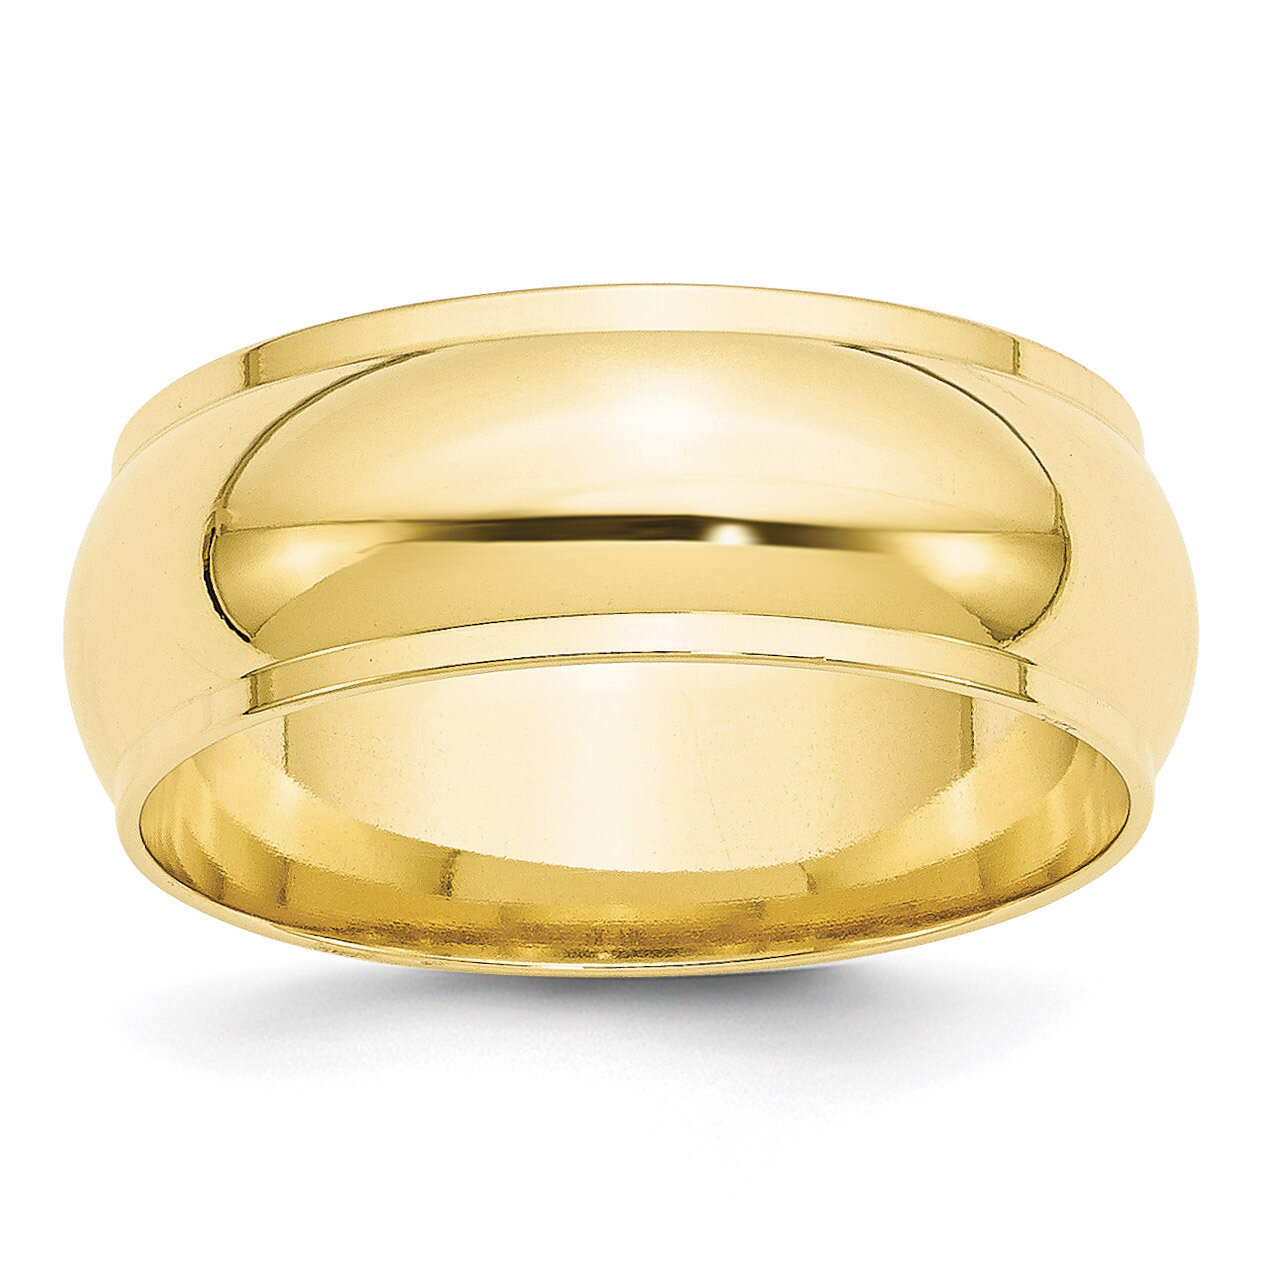 8mm Half Round with Edge Band 10k Yellow Gold 1HRE080 Engravable